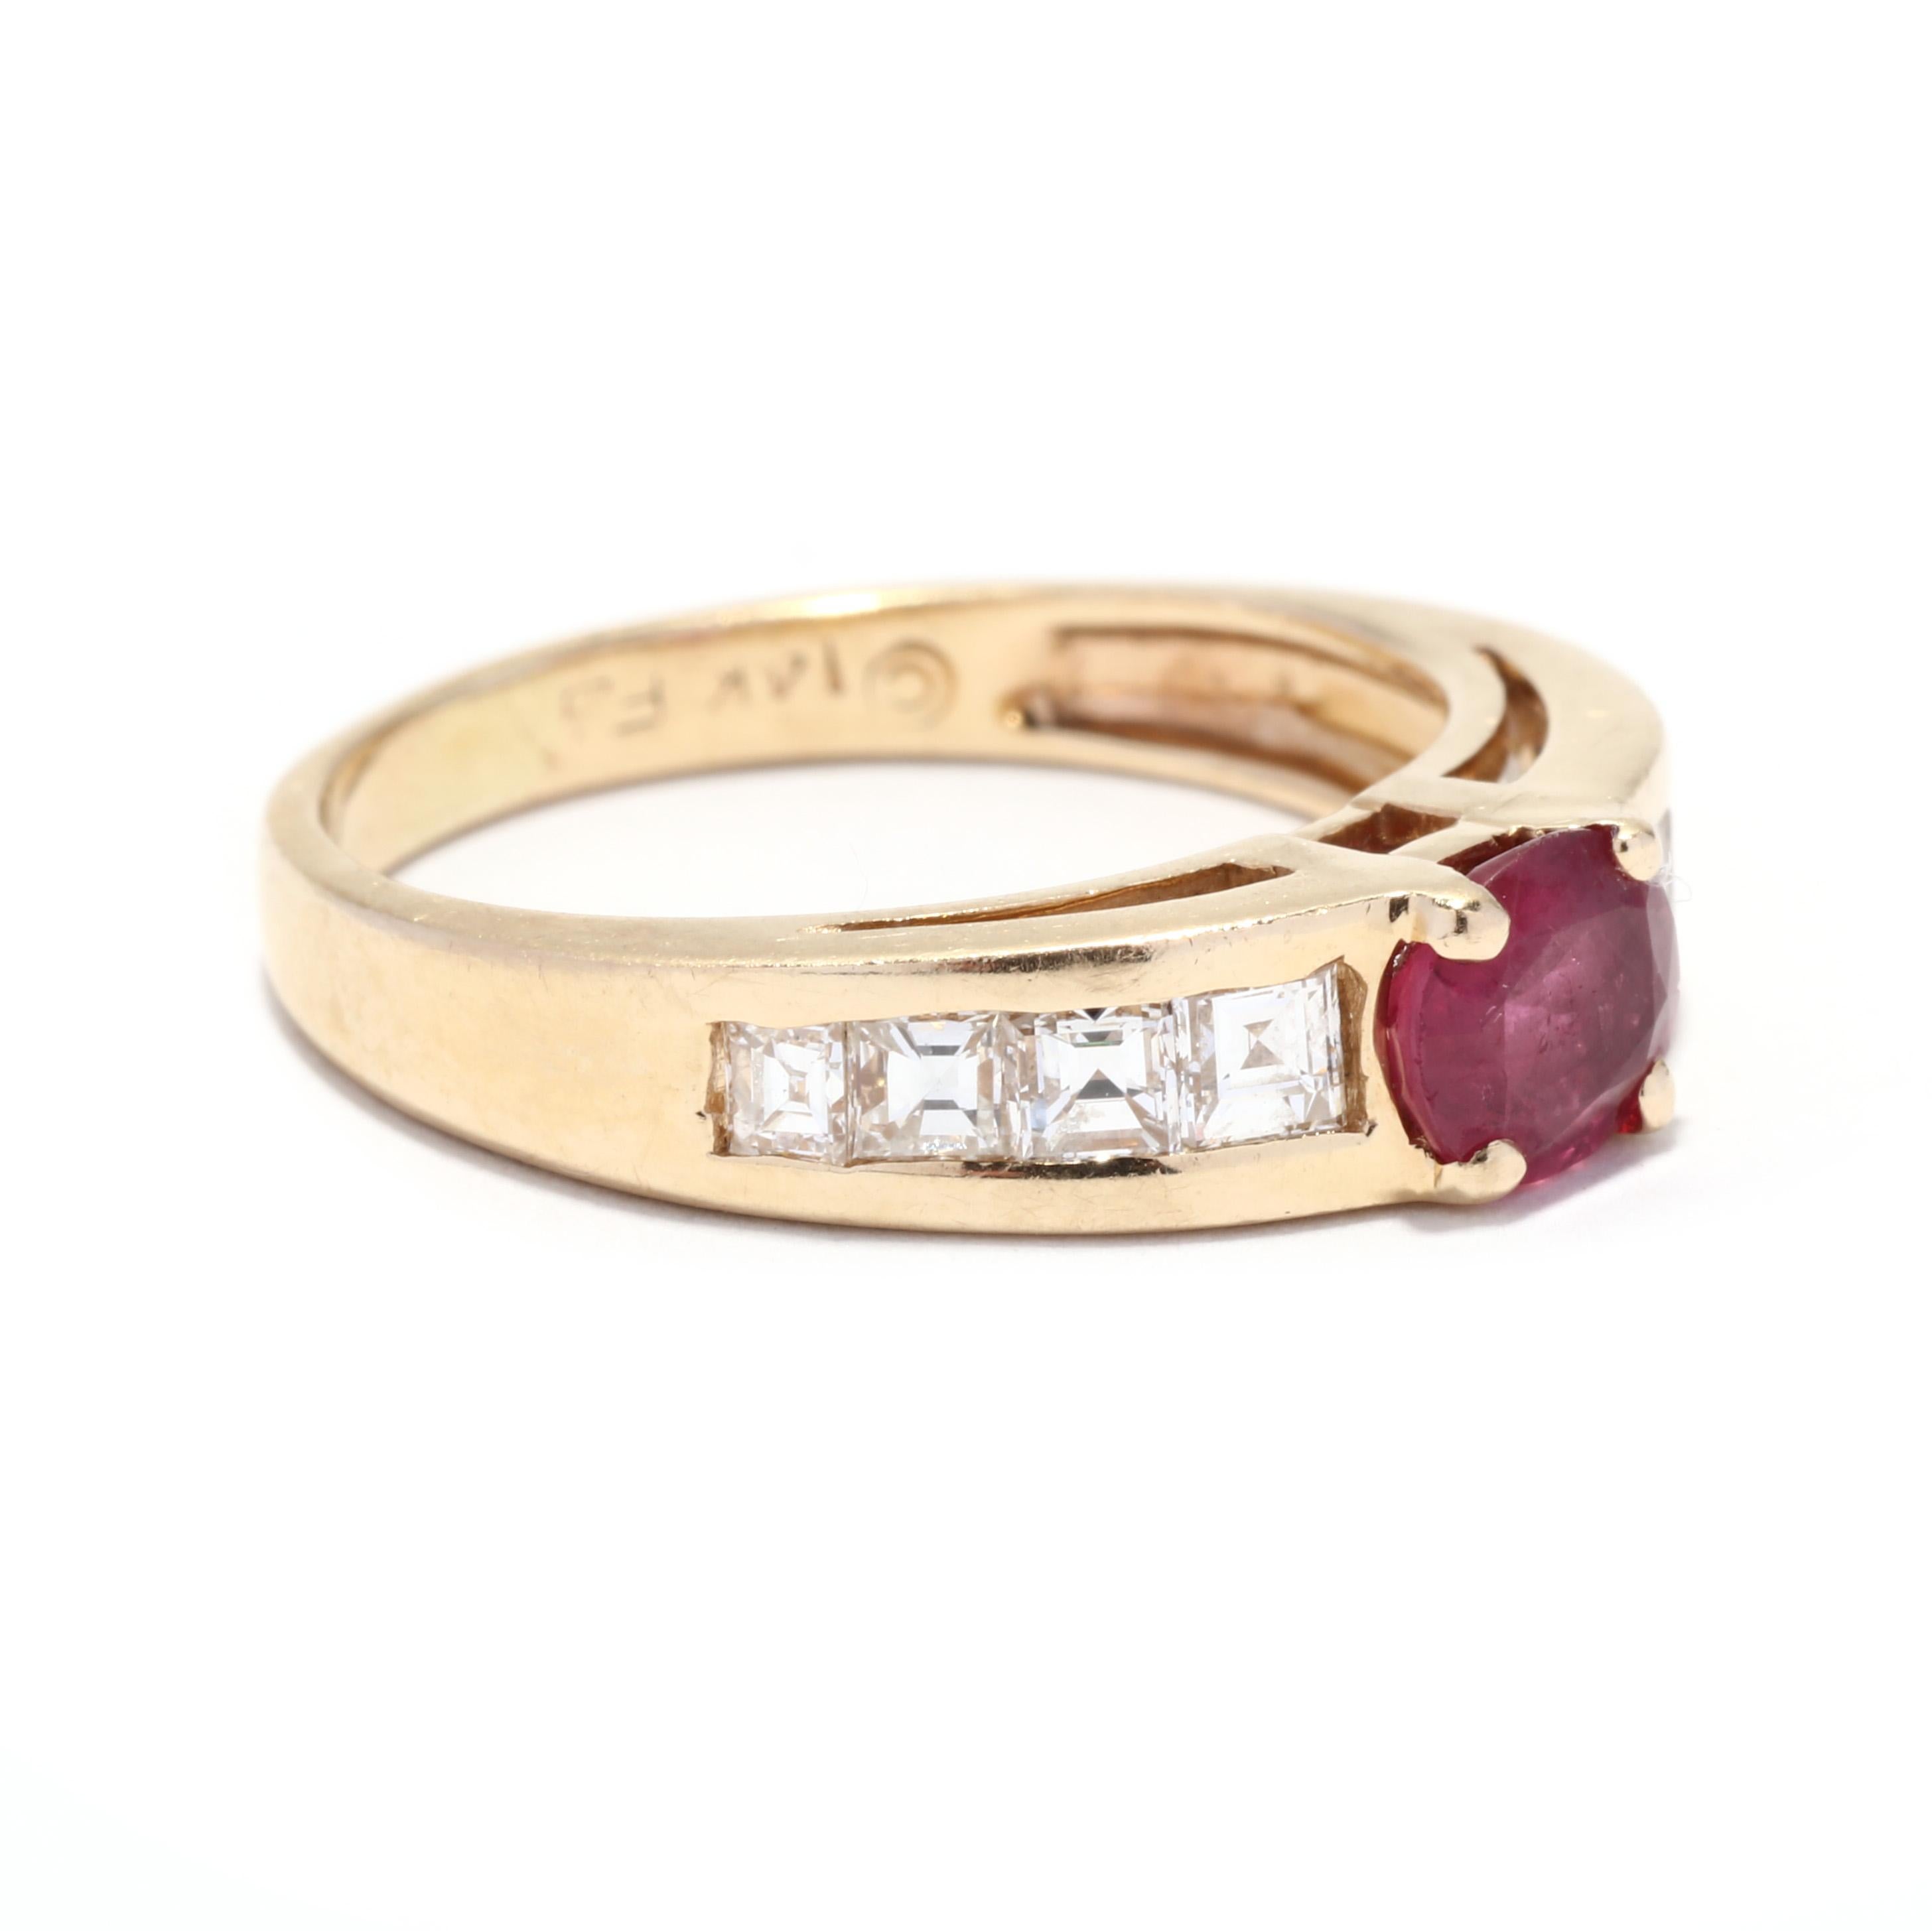 A vintage 14 karat yellow gold oval and diamond ring. This ring features a horizontal prong set, oval cut ruby weighing approximately .51 carat with channel set square cut diamonds down the band weighing approximately .55 total carats and a slightly